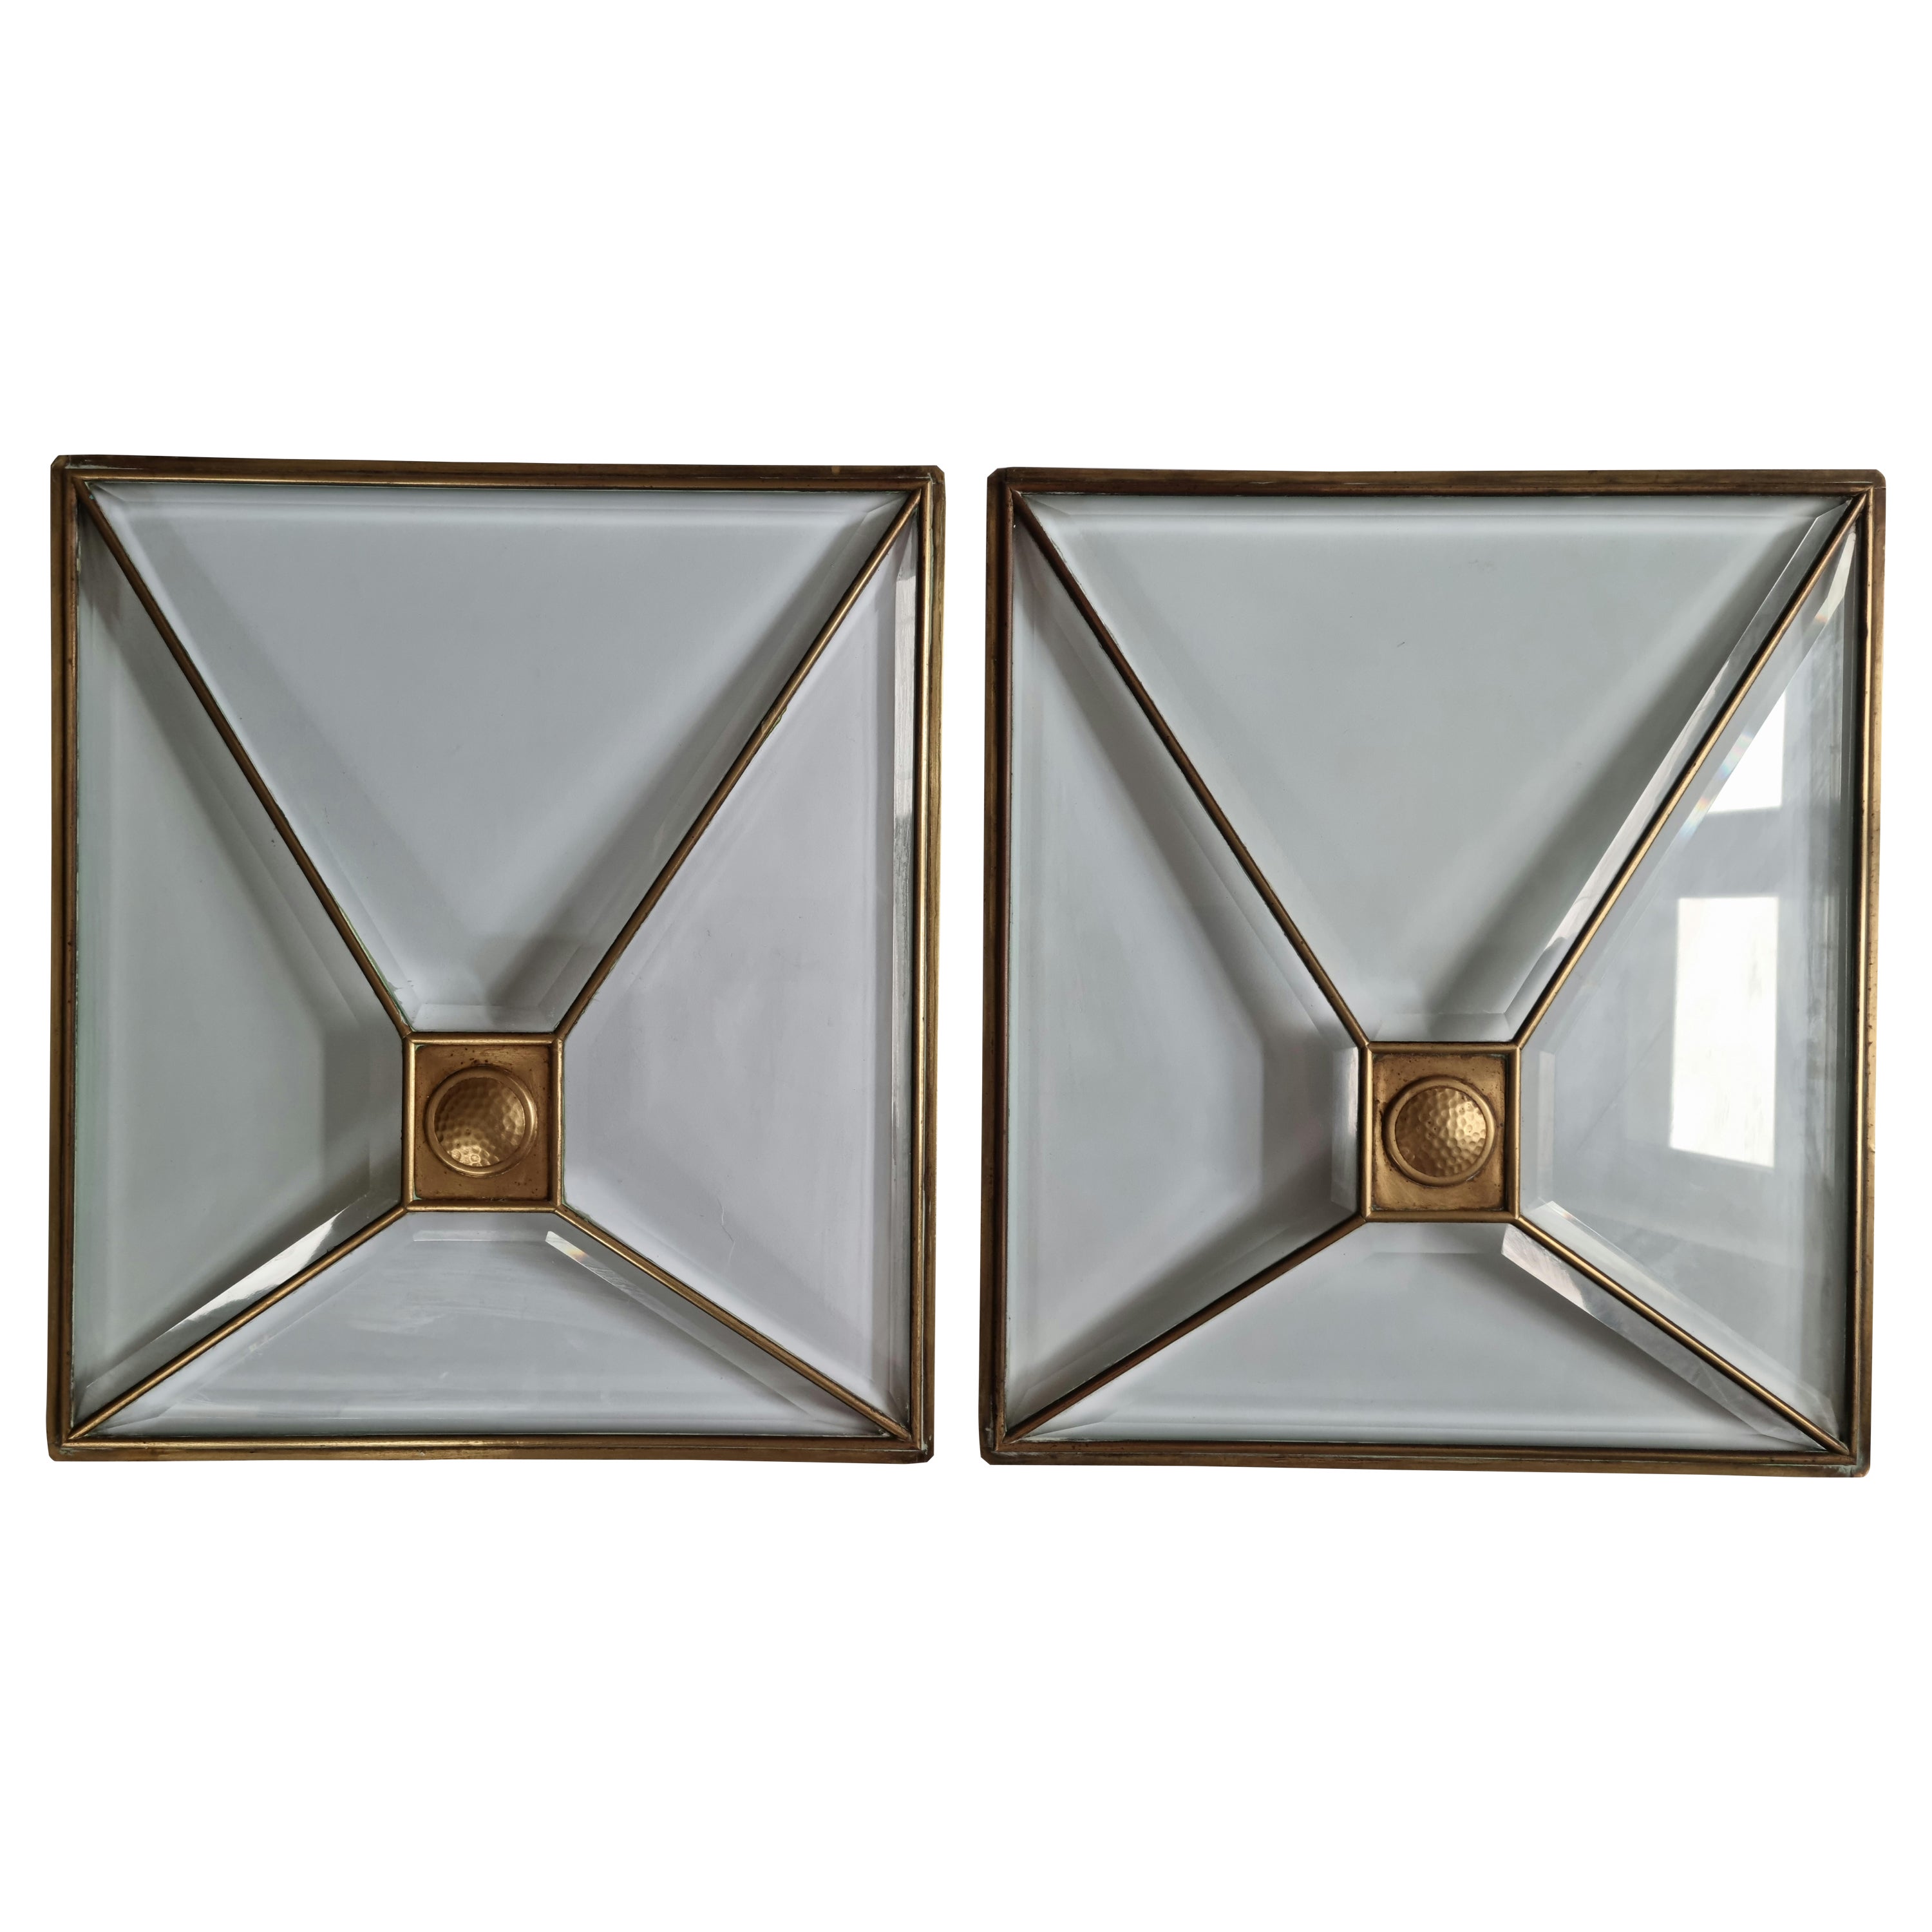 Set of Two Rare Art Deco Windows, Faceted Glass and Brass, Austria, 1930s For Sale